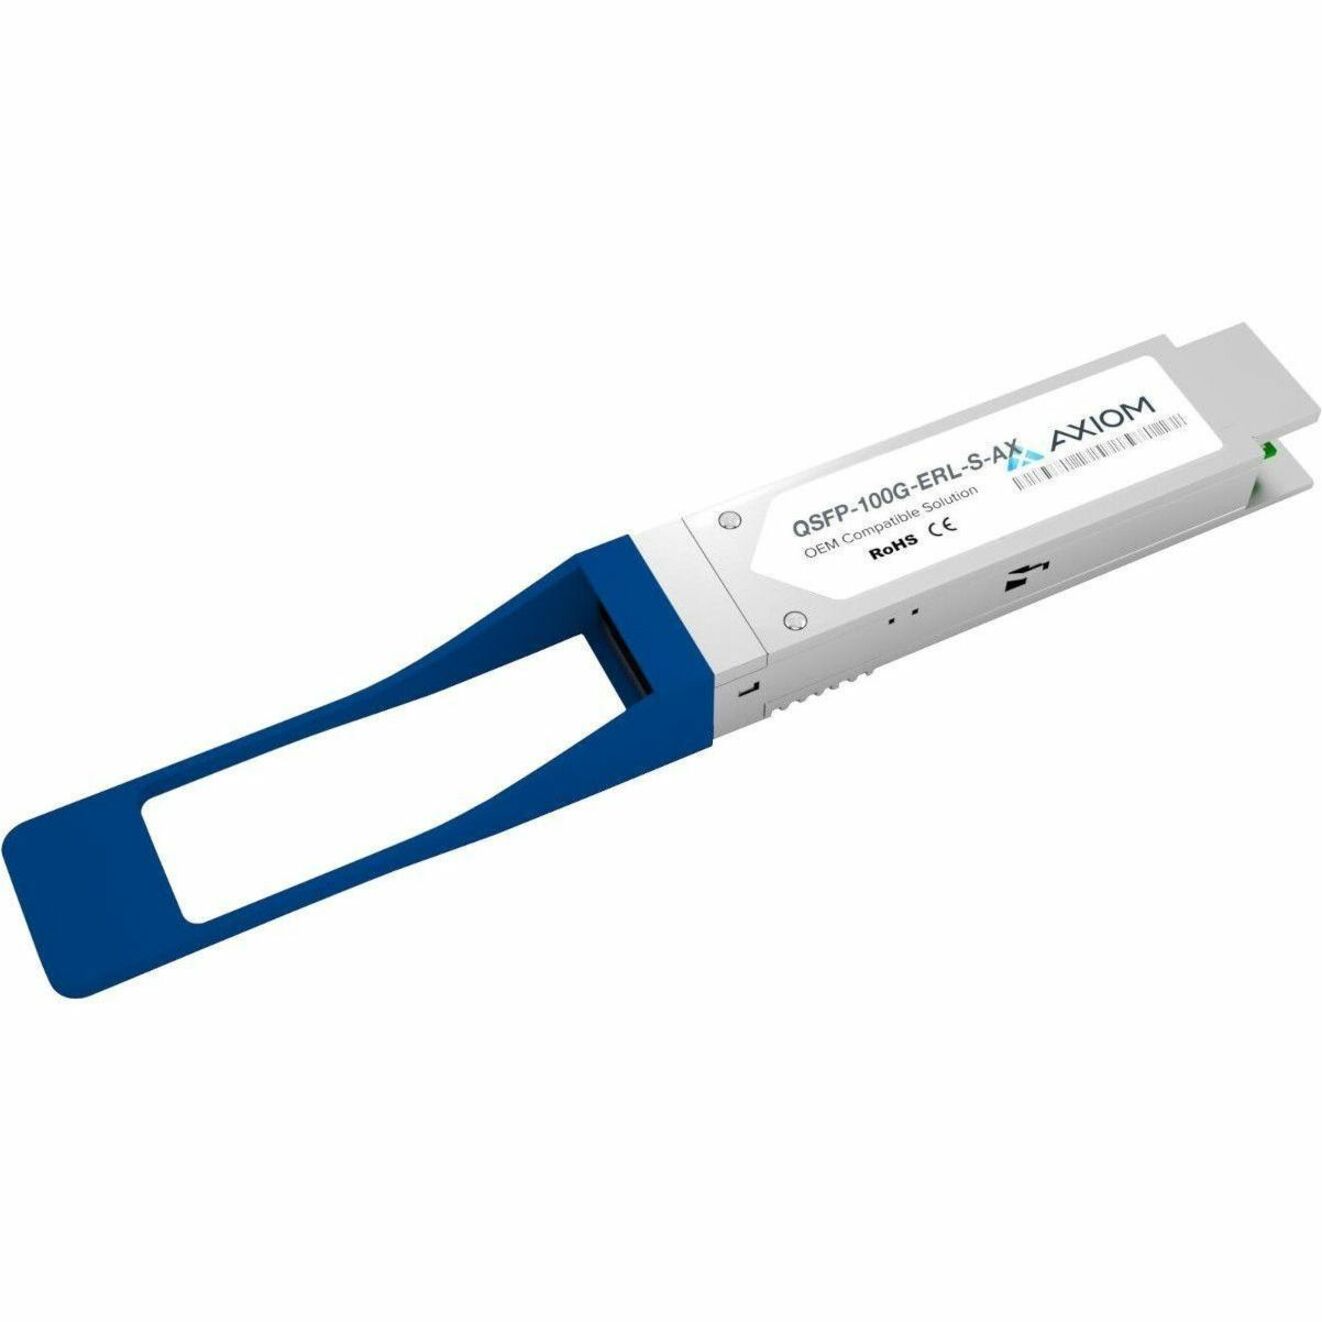 Axiom QSFP-100G-ERL-S-AX 100GBASE-ERL QSFP28 Transceiver for Cisco, 82021 ft Maximum Distance Supported